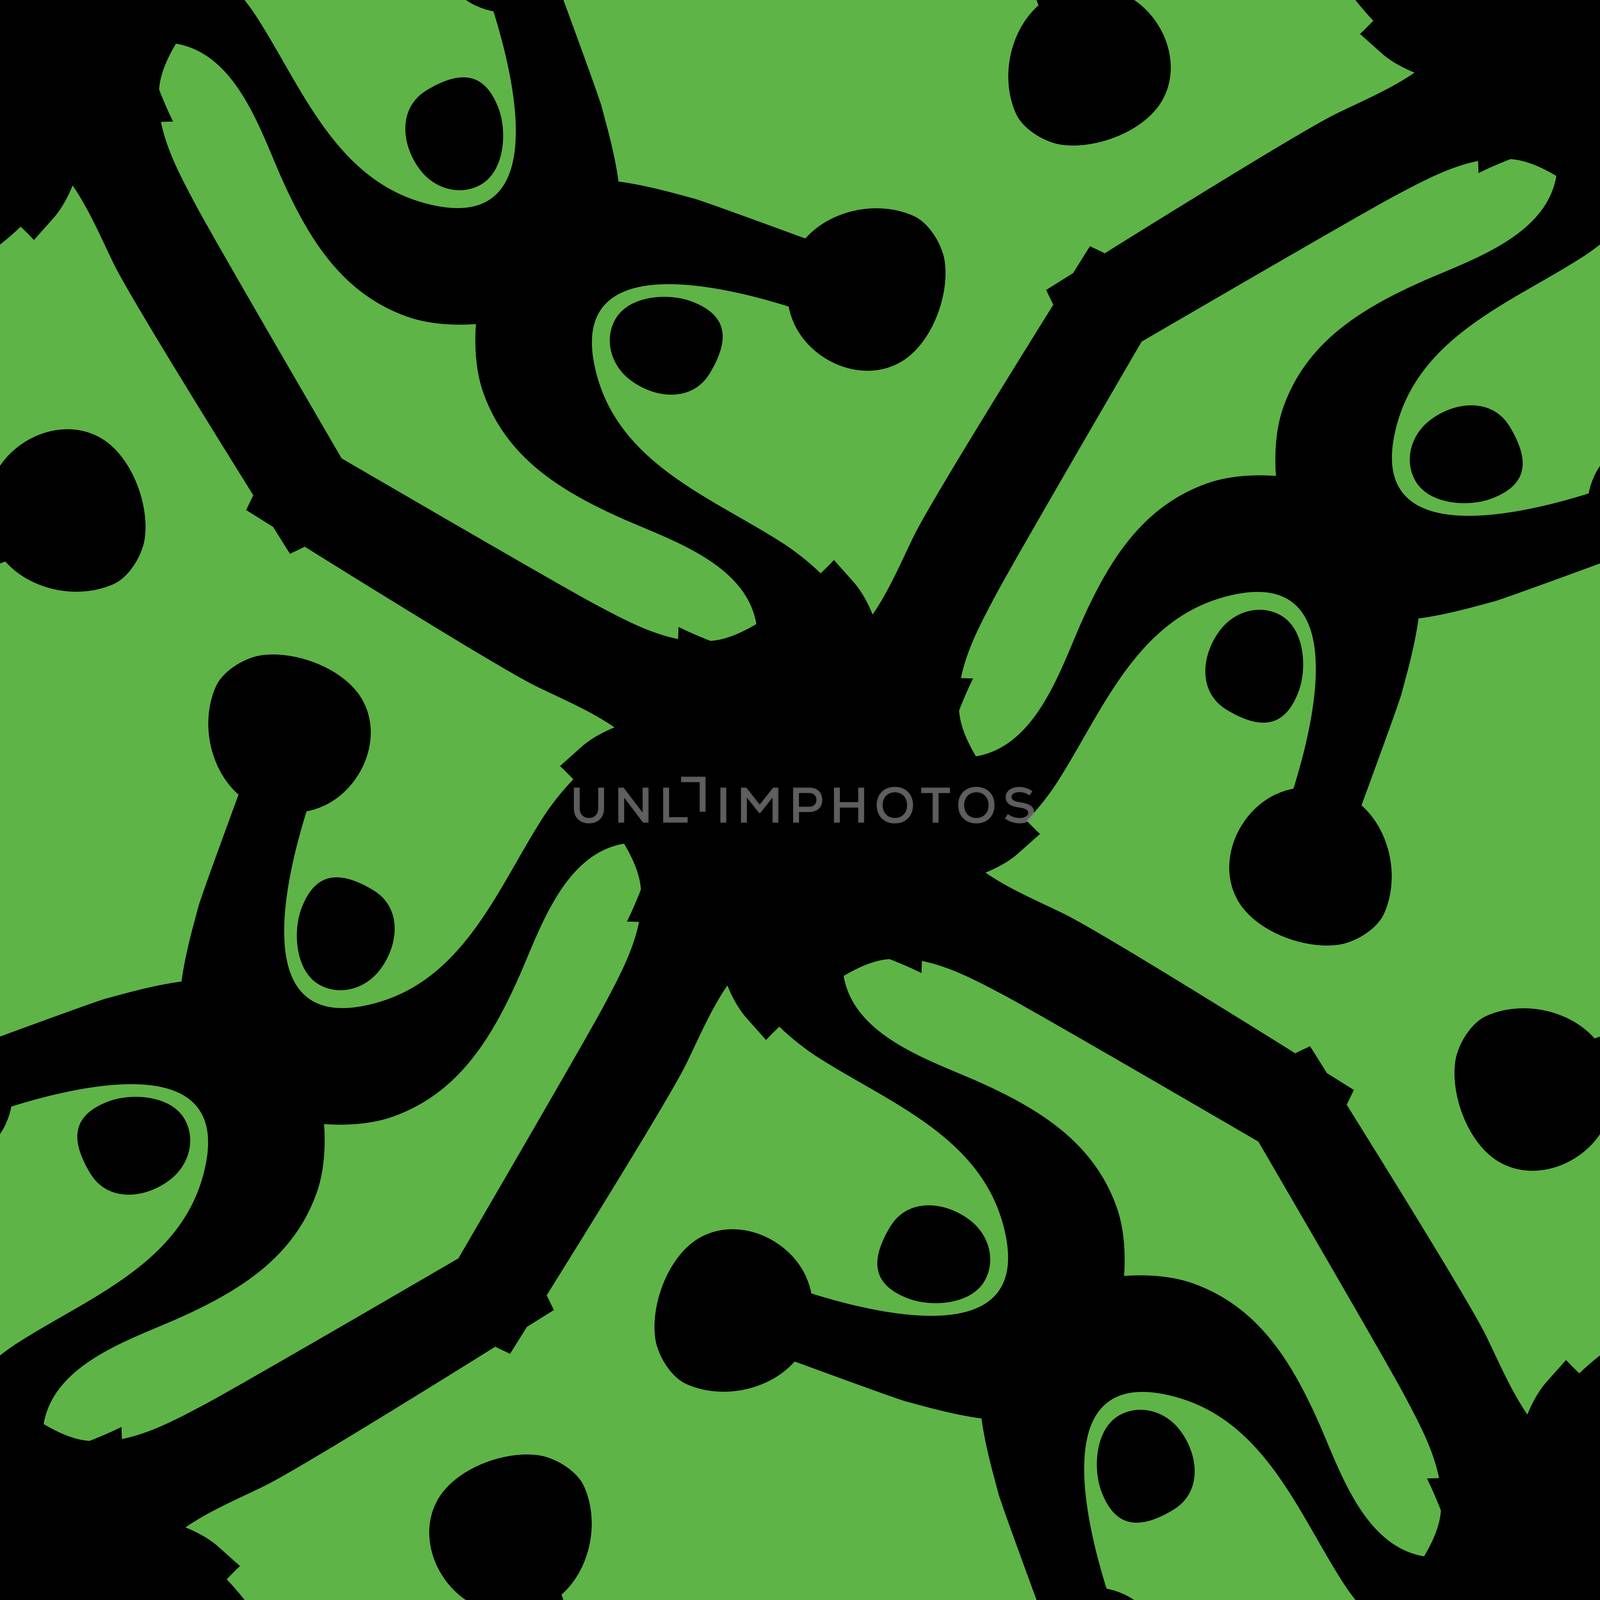 Green background pattern of abstract circuit shapes